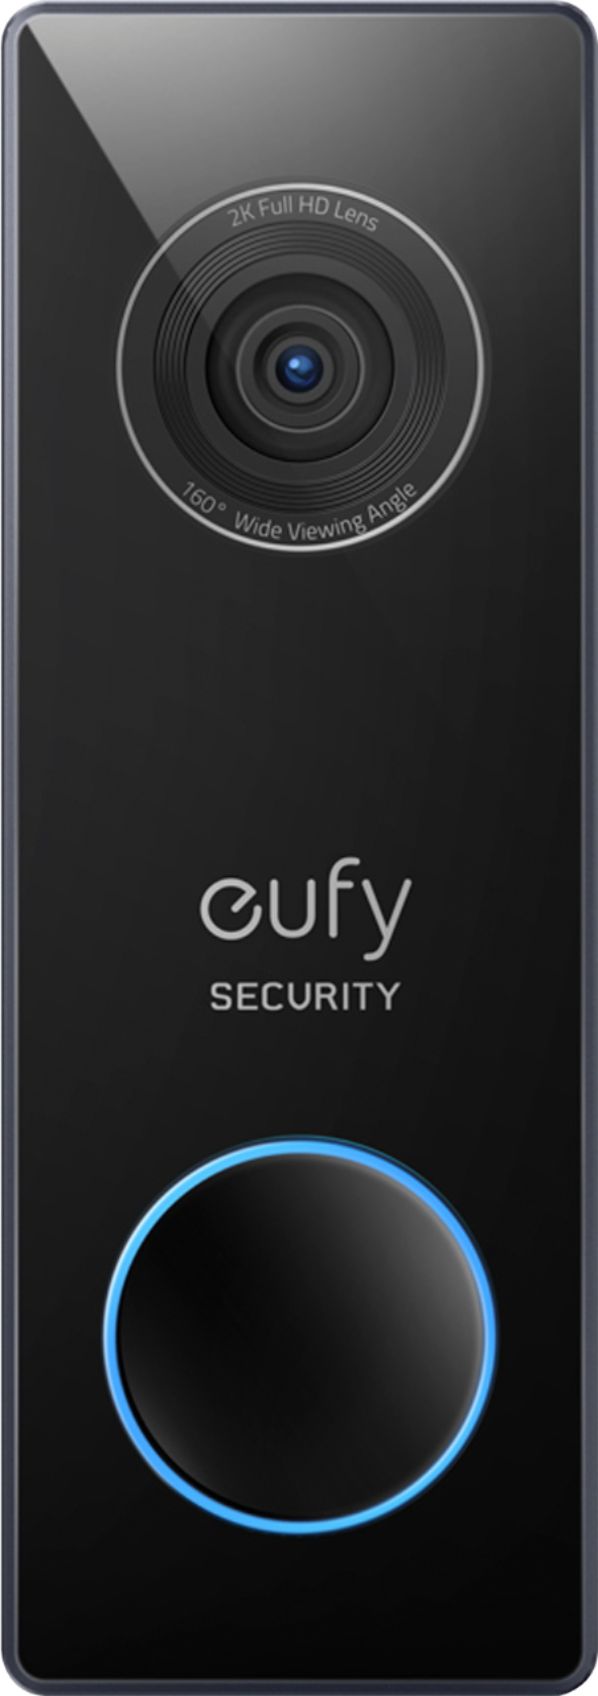 Angle View: eufy Security - Smart Wi-Fi Video Doorbell 2K Pro Wired - Black/White